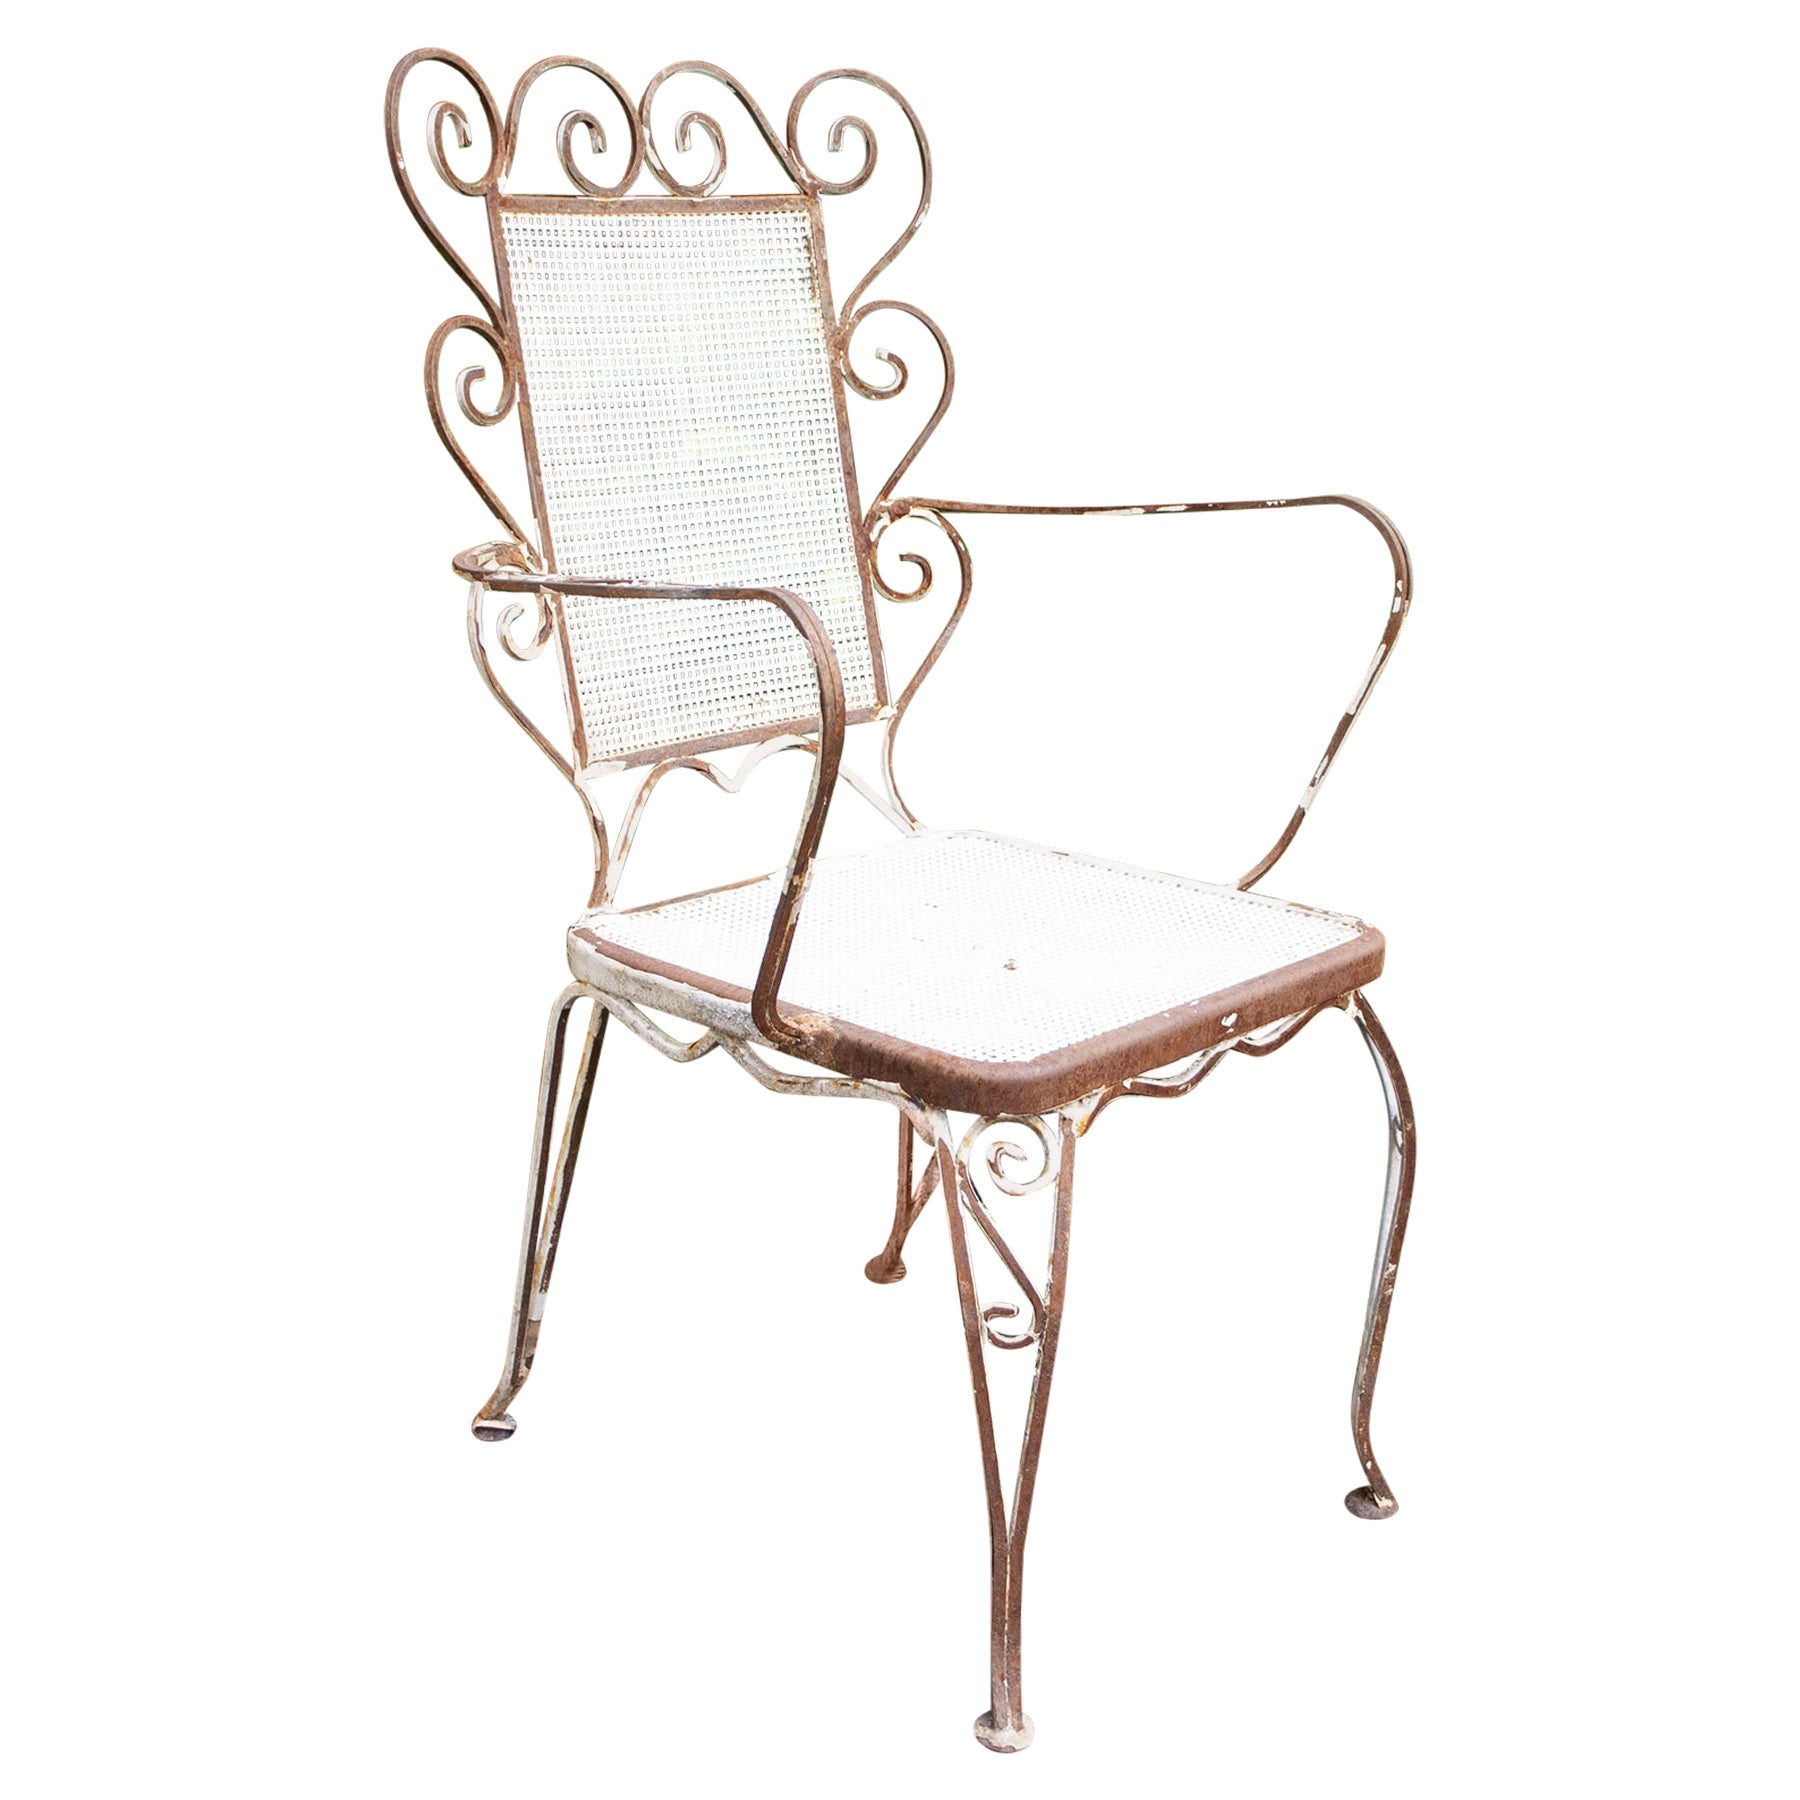 Wrought Iron Chairs from the 1950s Casa e Giardino For Sale